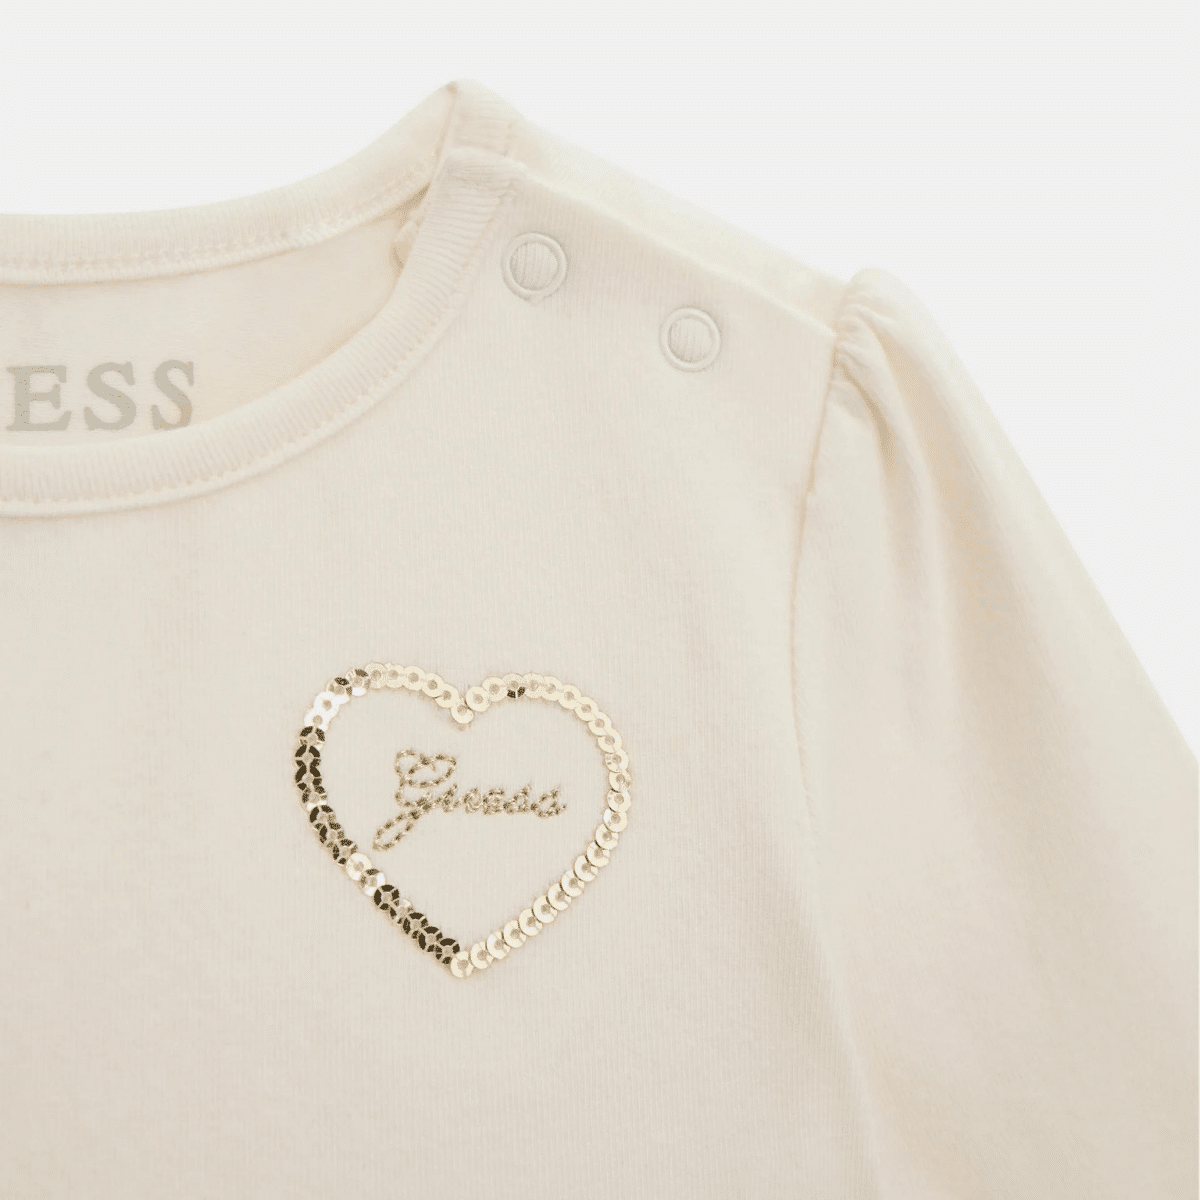 Guess girls long sleeved top with heart emblem